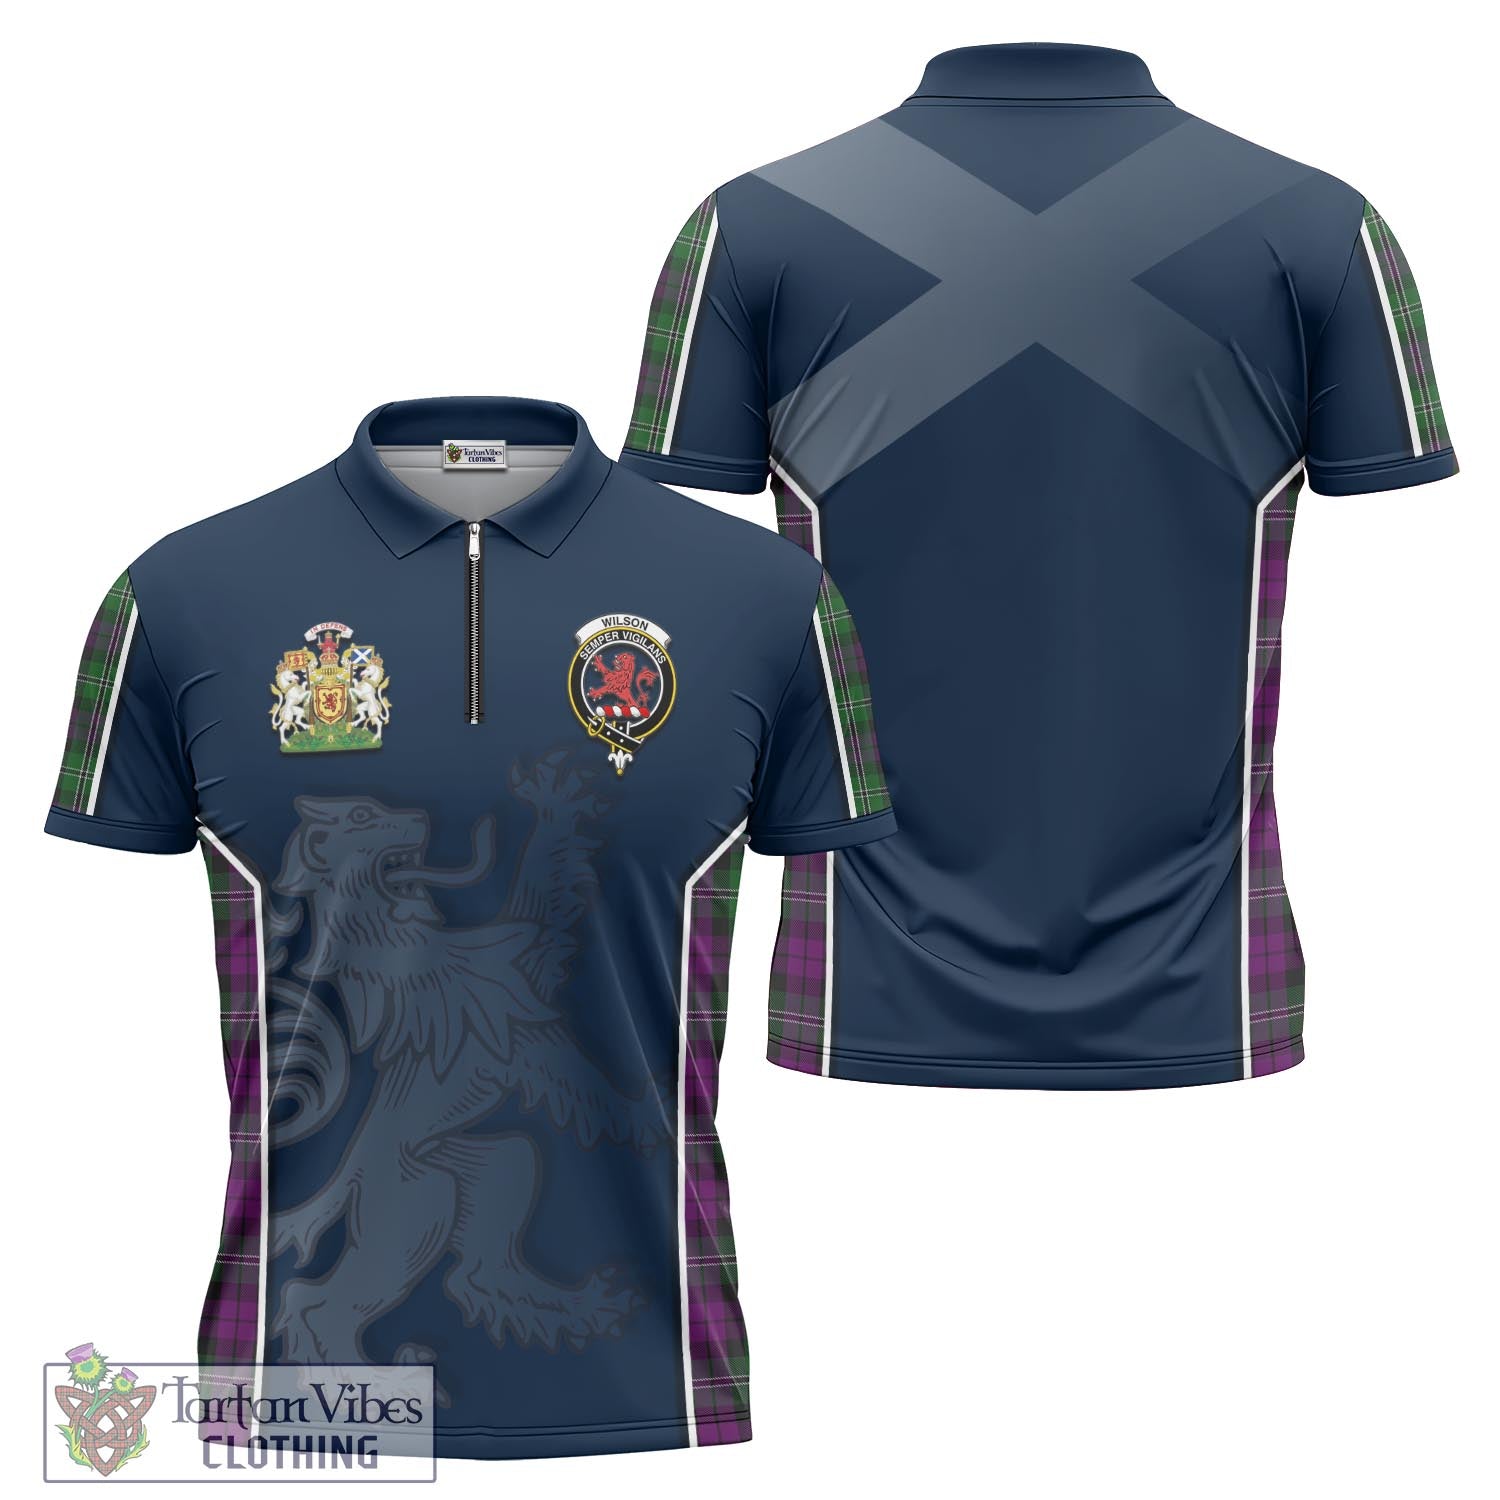 Tartan Vibes Clothing Wilson Tartan Zipper Polo Shirt with Family Crest and Lion Rampant Vibes Sport Style